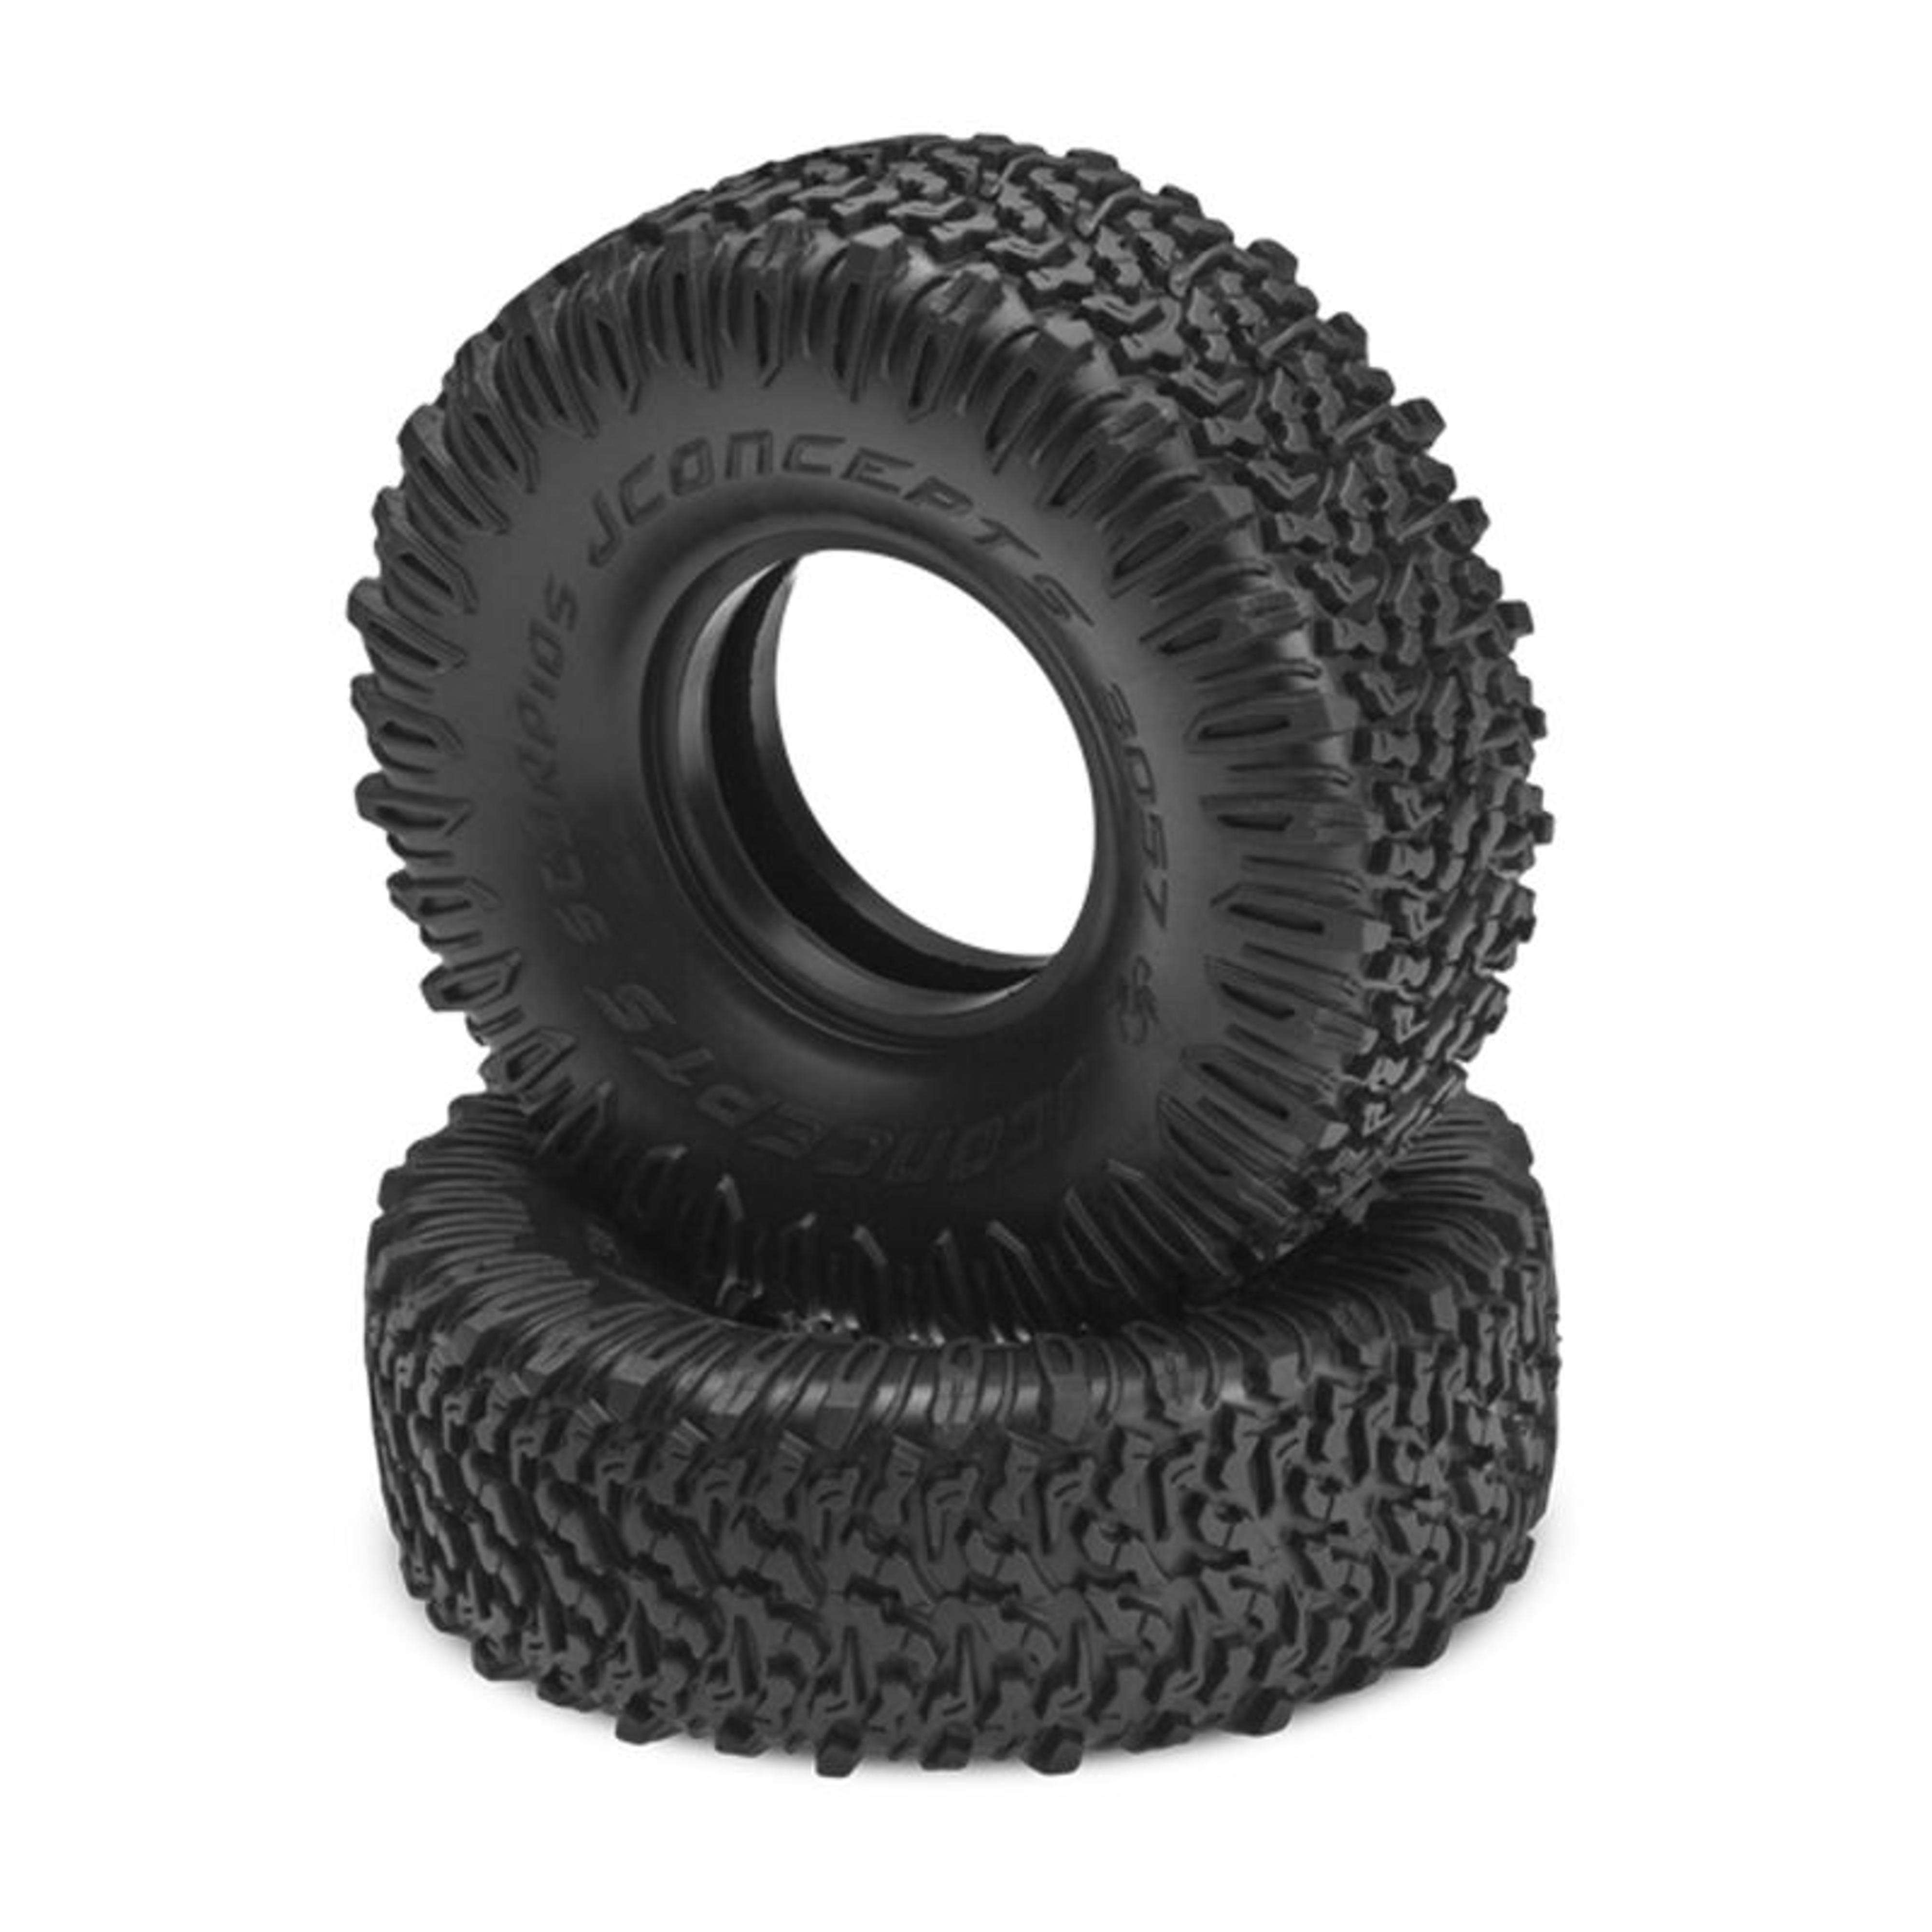 JConcepts Scorpios 1.9 All-Terrain Scaling Tire (Green Compound, 1 Pair)